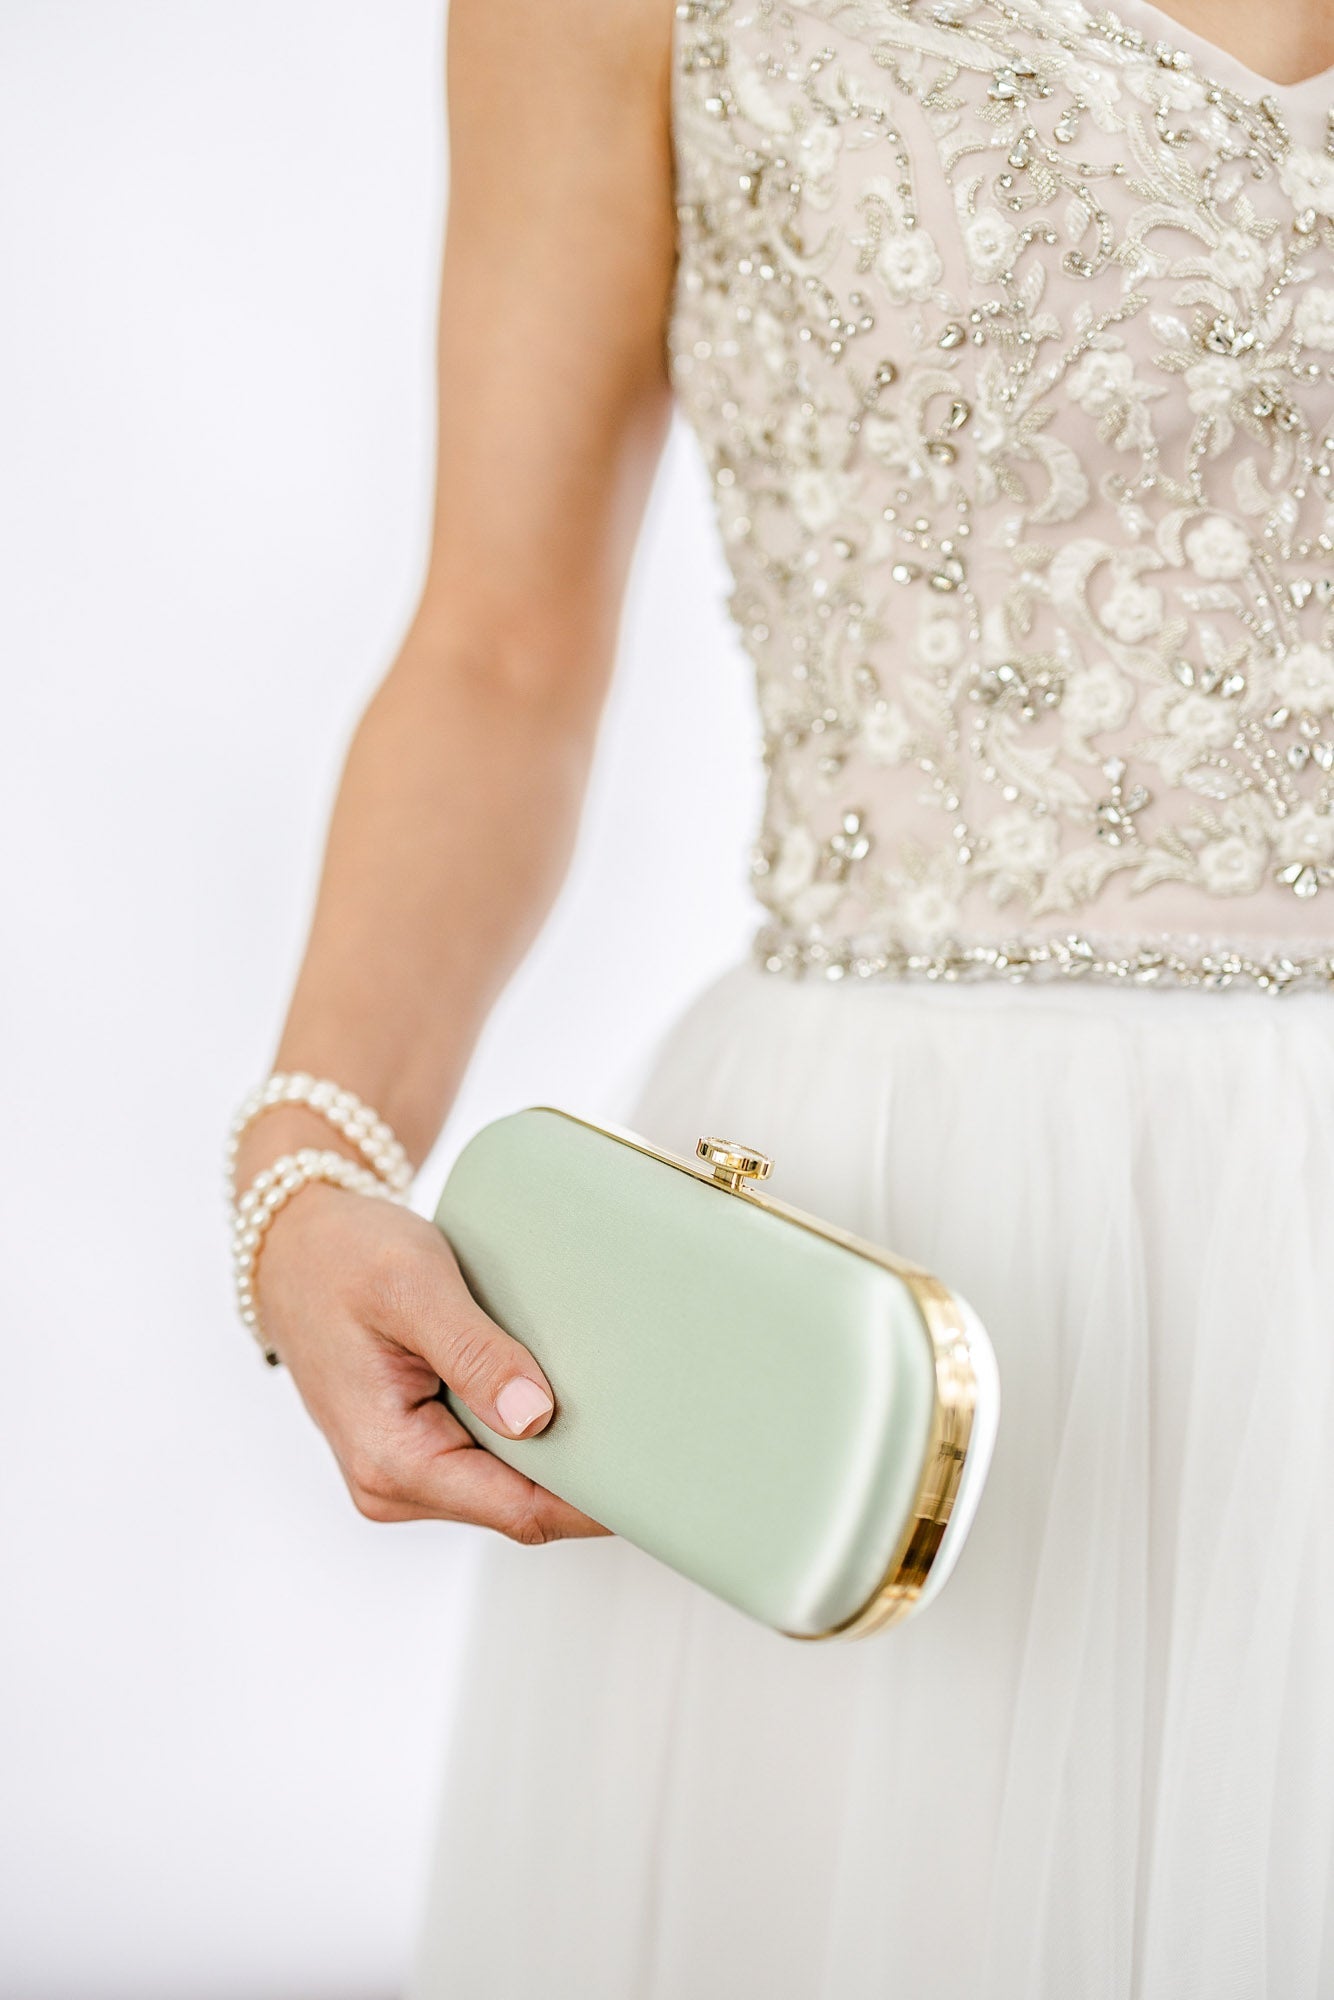 Woman in an elegant dress holding a Sage Green Bella Clutch.
Product Name: Bella Clutch Sage Green Satin Petite
Brand Name: The Bella Rosa Collection